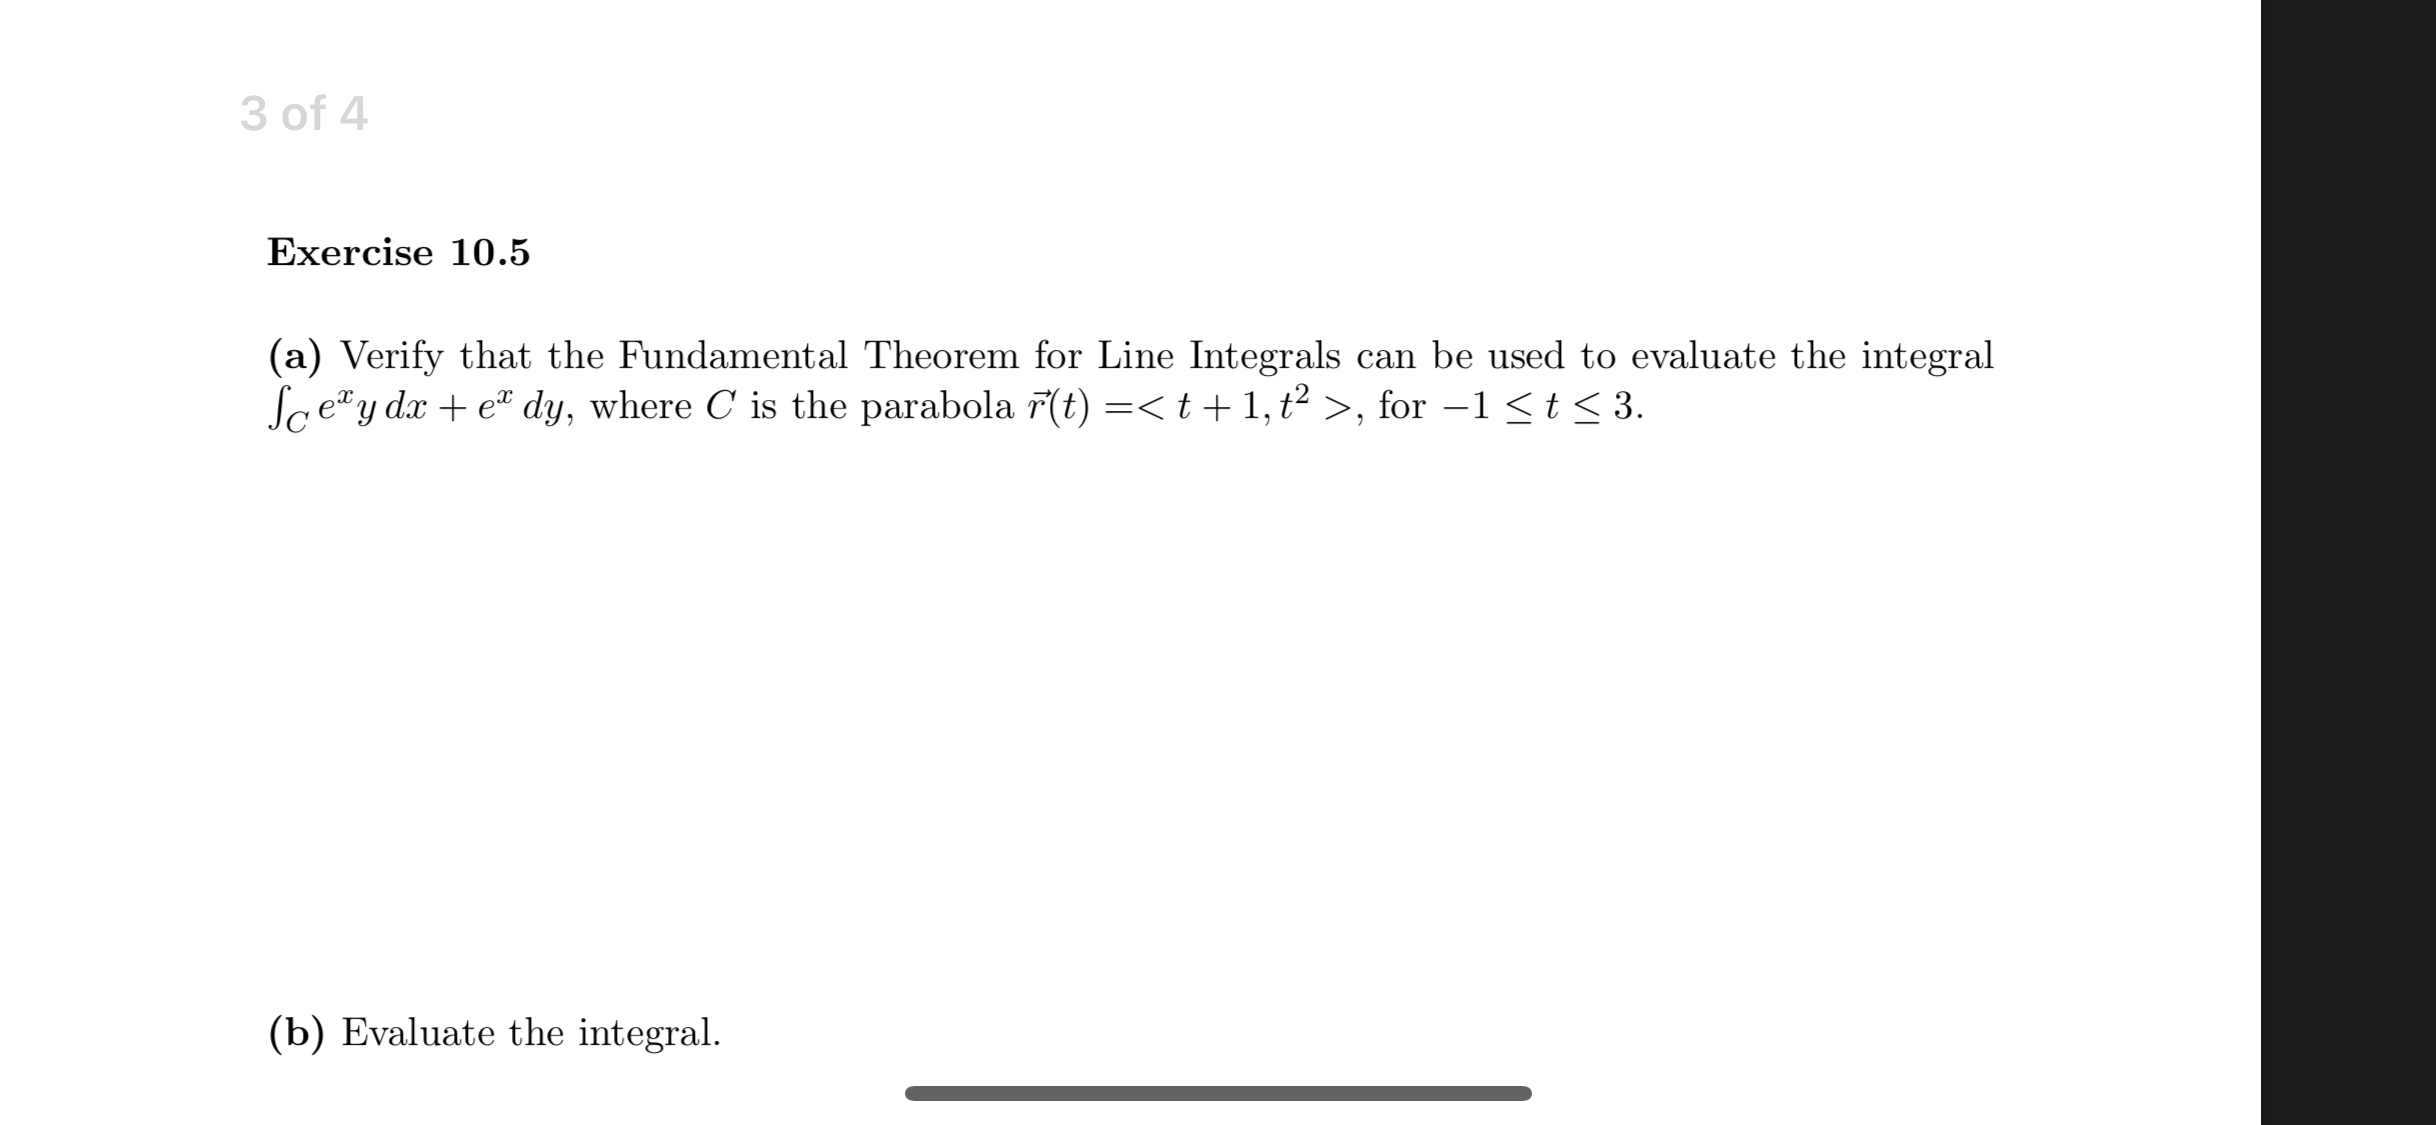 (a) Verify that the Fundamental Theorem for Line Integrals can be used to evaluate the integral
Sc ey dx + e dy, where C is the parabola r(t) =< t+ 1, t² >, for –1 <t < 3.
